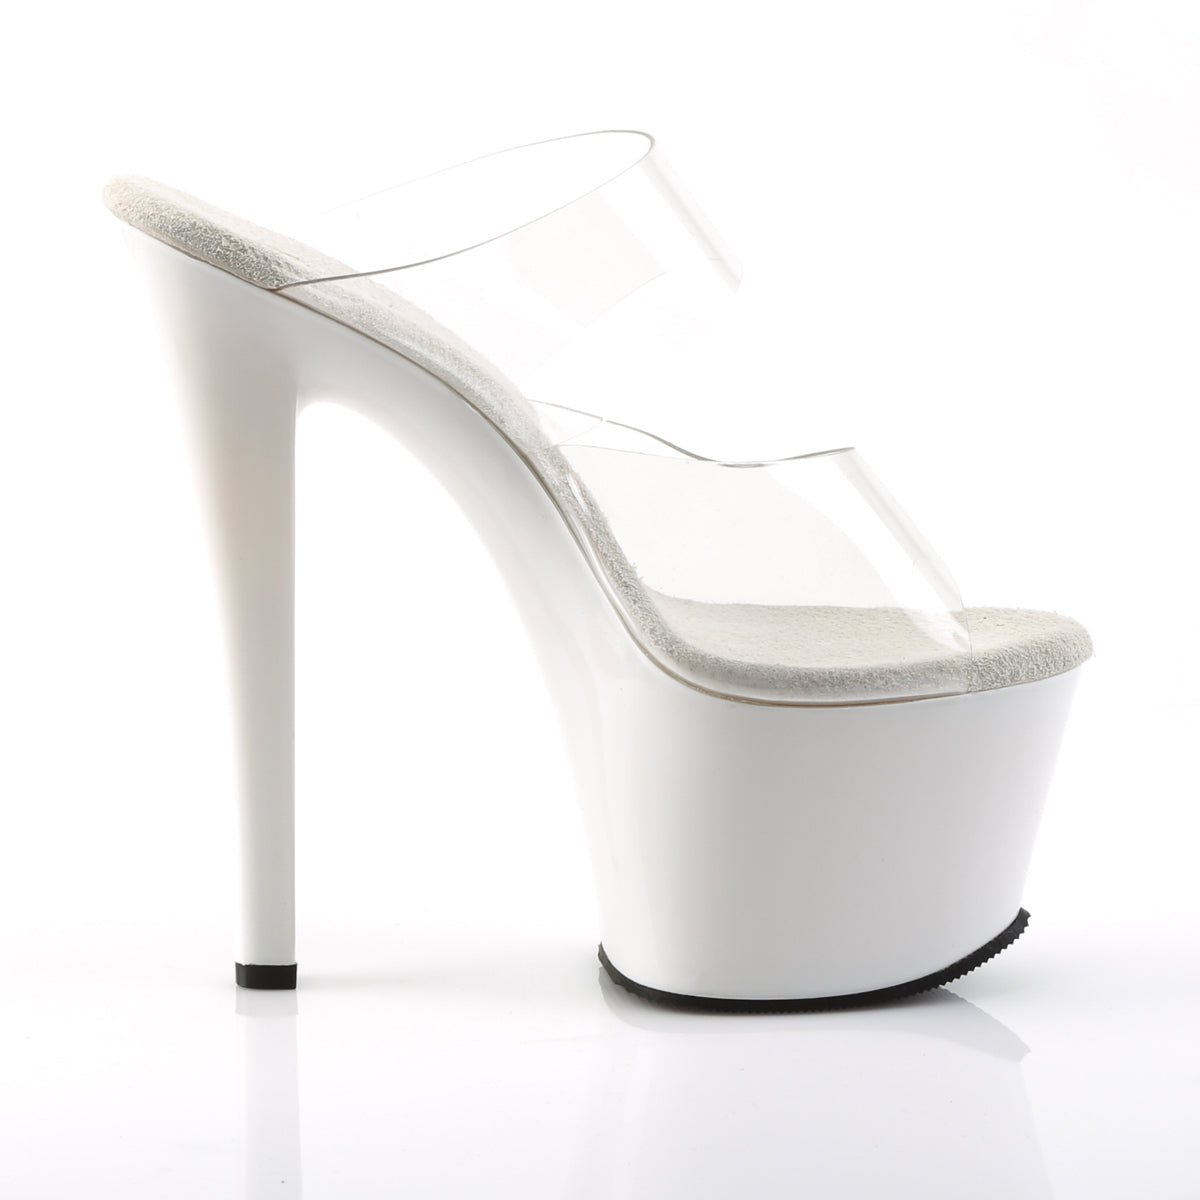 SKY-302 7" Heel Clear and White Pole Dancing Platforms-Pleaser- Sexy Shoes Fetish Heels